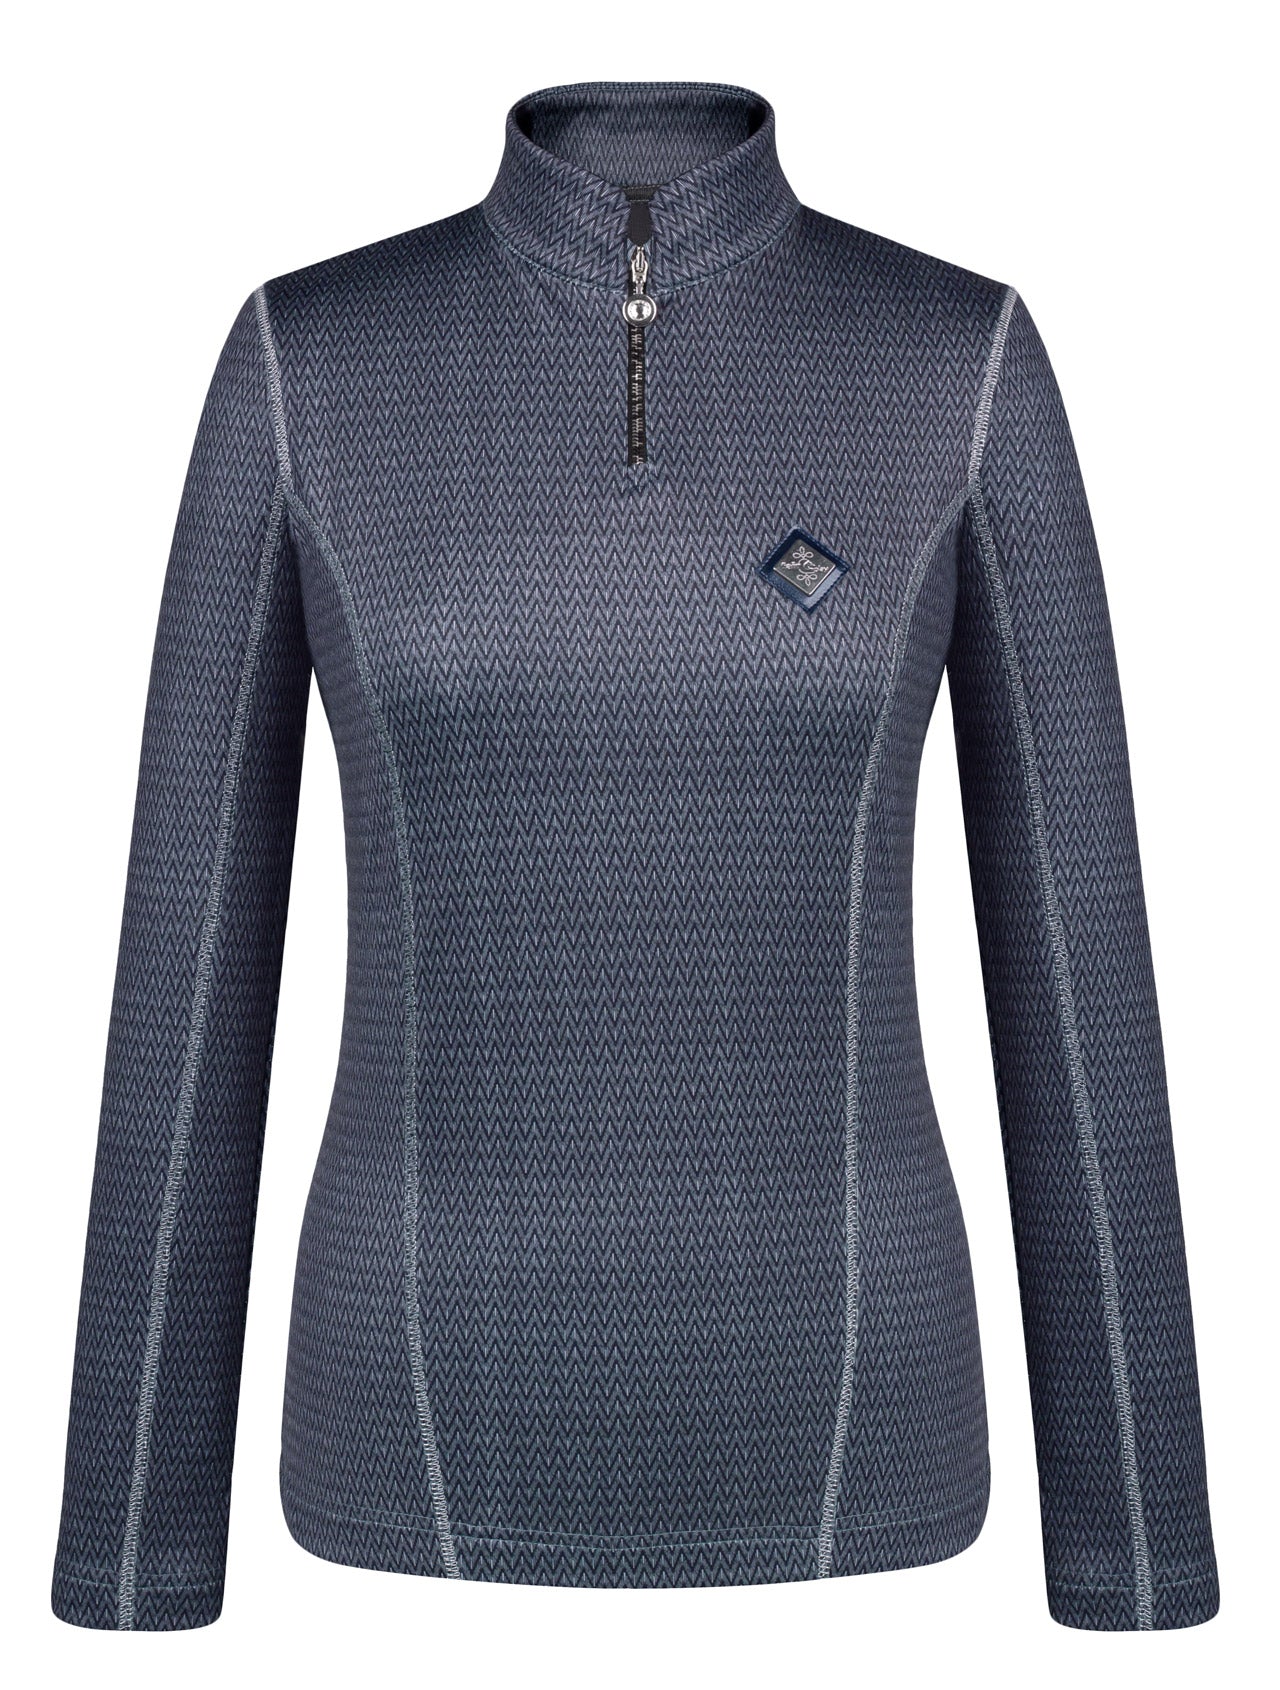 Base layer with a zipper for equestrians